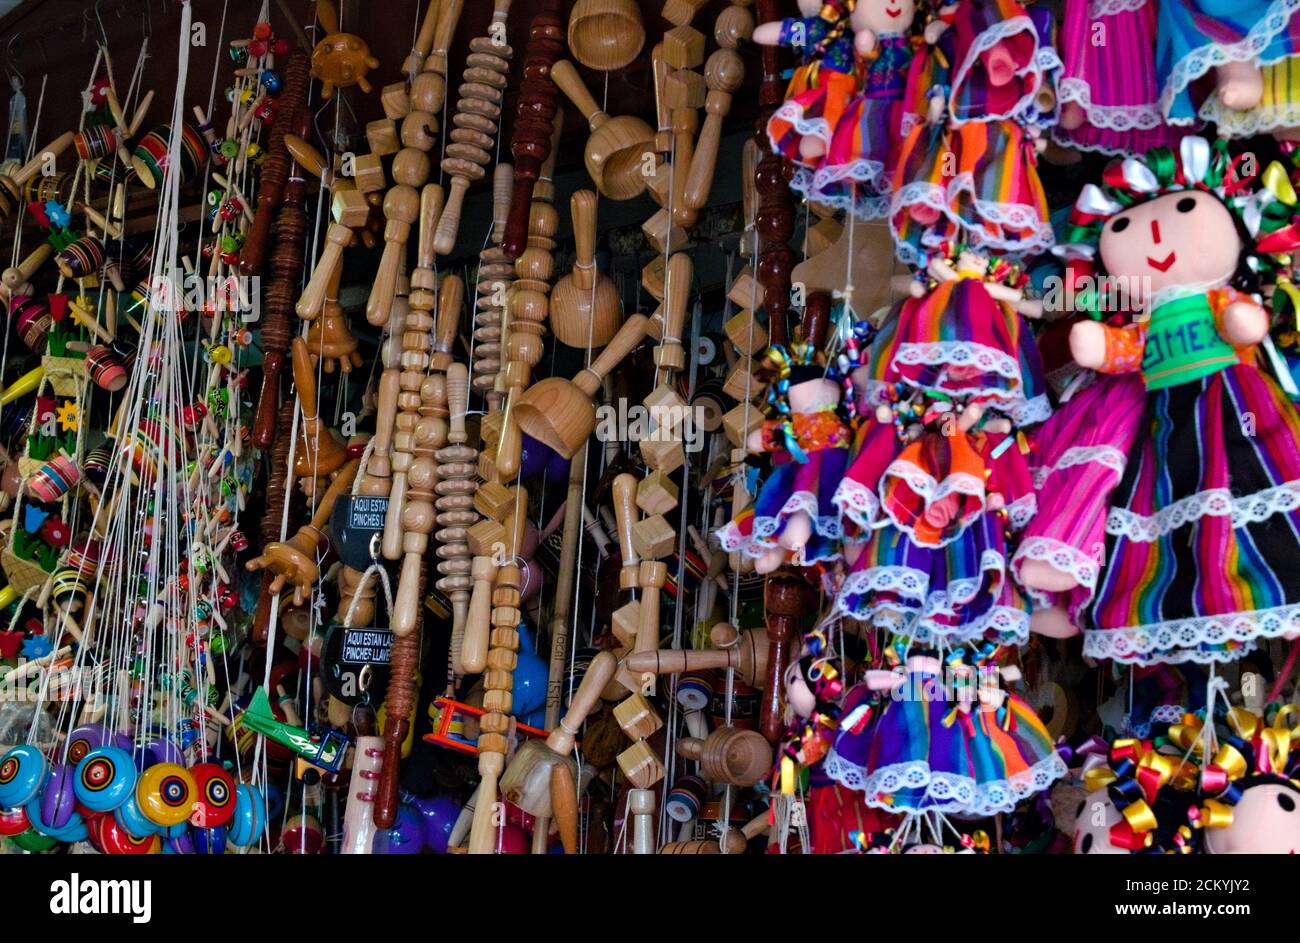 Traditional wooden Toys displayed at a Traditional market in Mexico Stock Photo